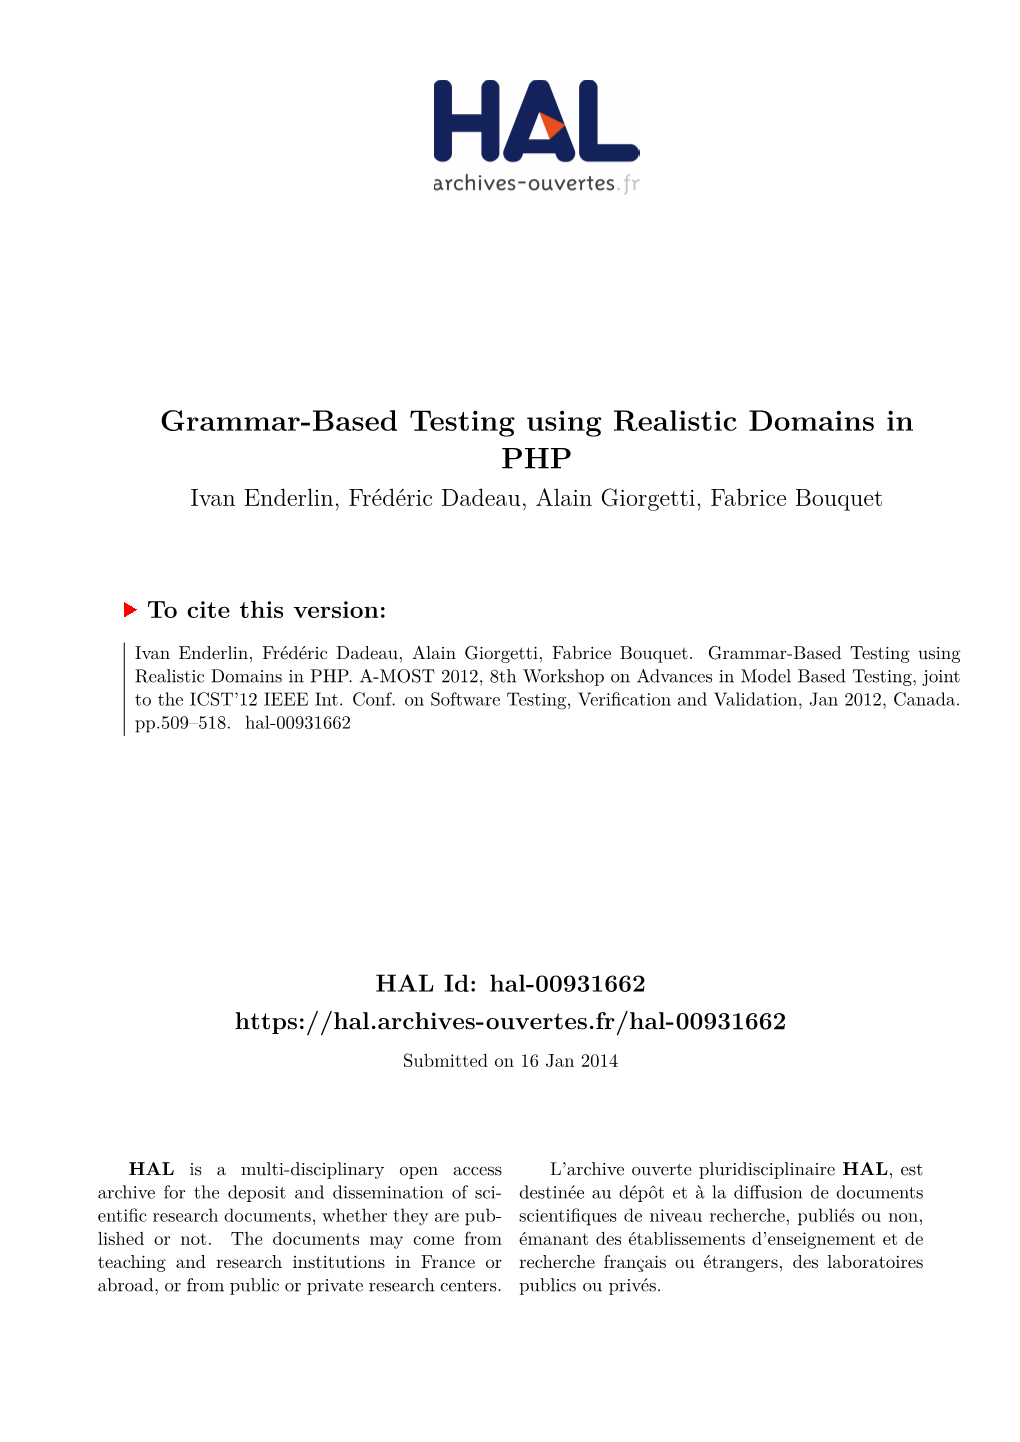 Grammar-Based Testing Using Realistic Domains in PHP Ivan Enderlin, Frédéric Dadeau, Alain Giorgetti, Fabrice Bouquet